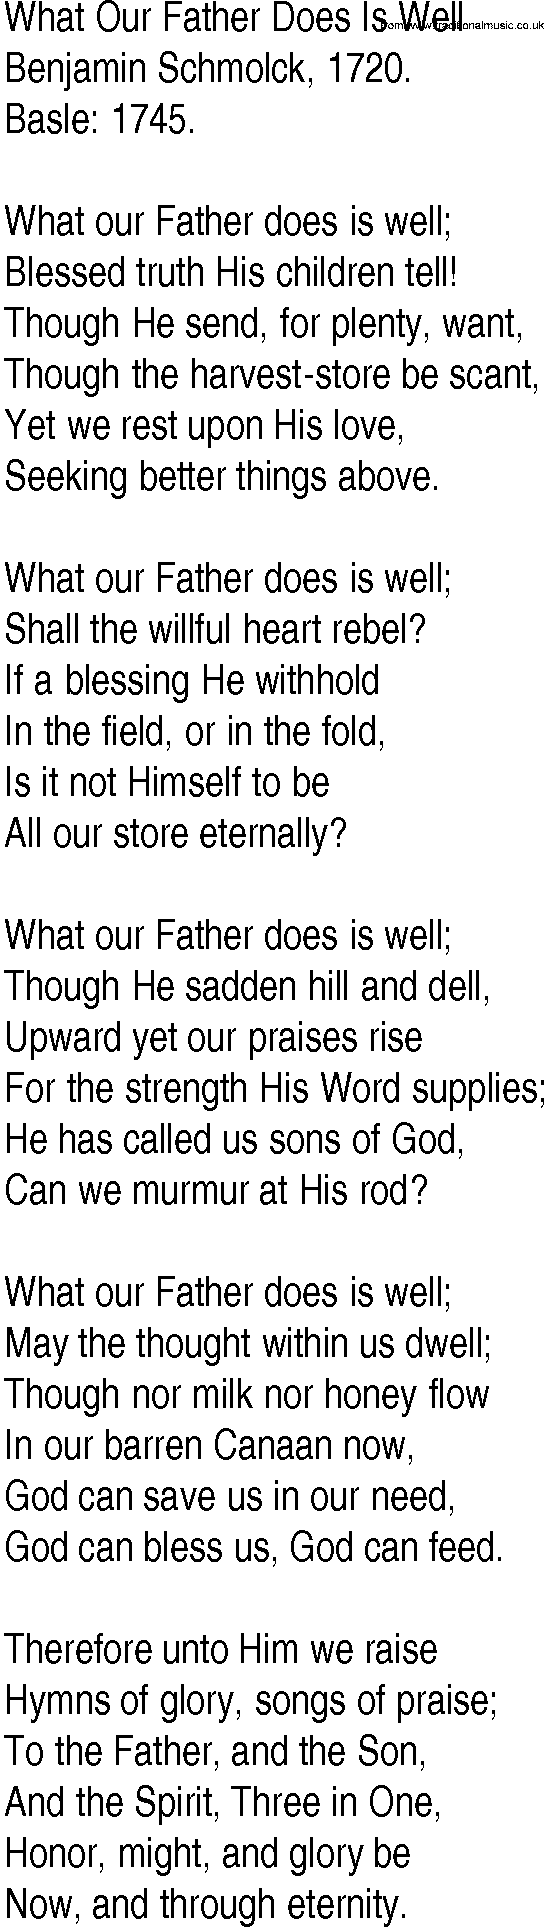 Hymn and Gospel Song: What Our Father Does Is Well by Benjamin Schmolck lyrics